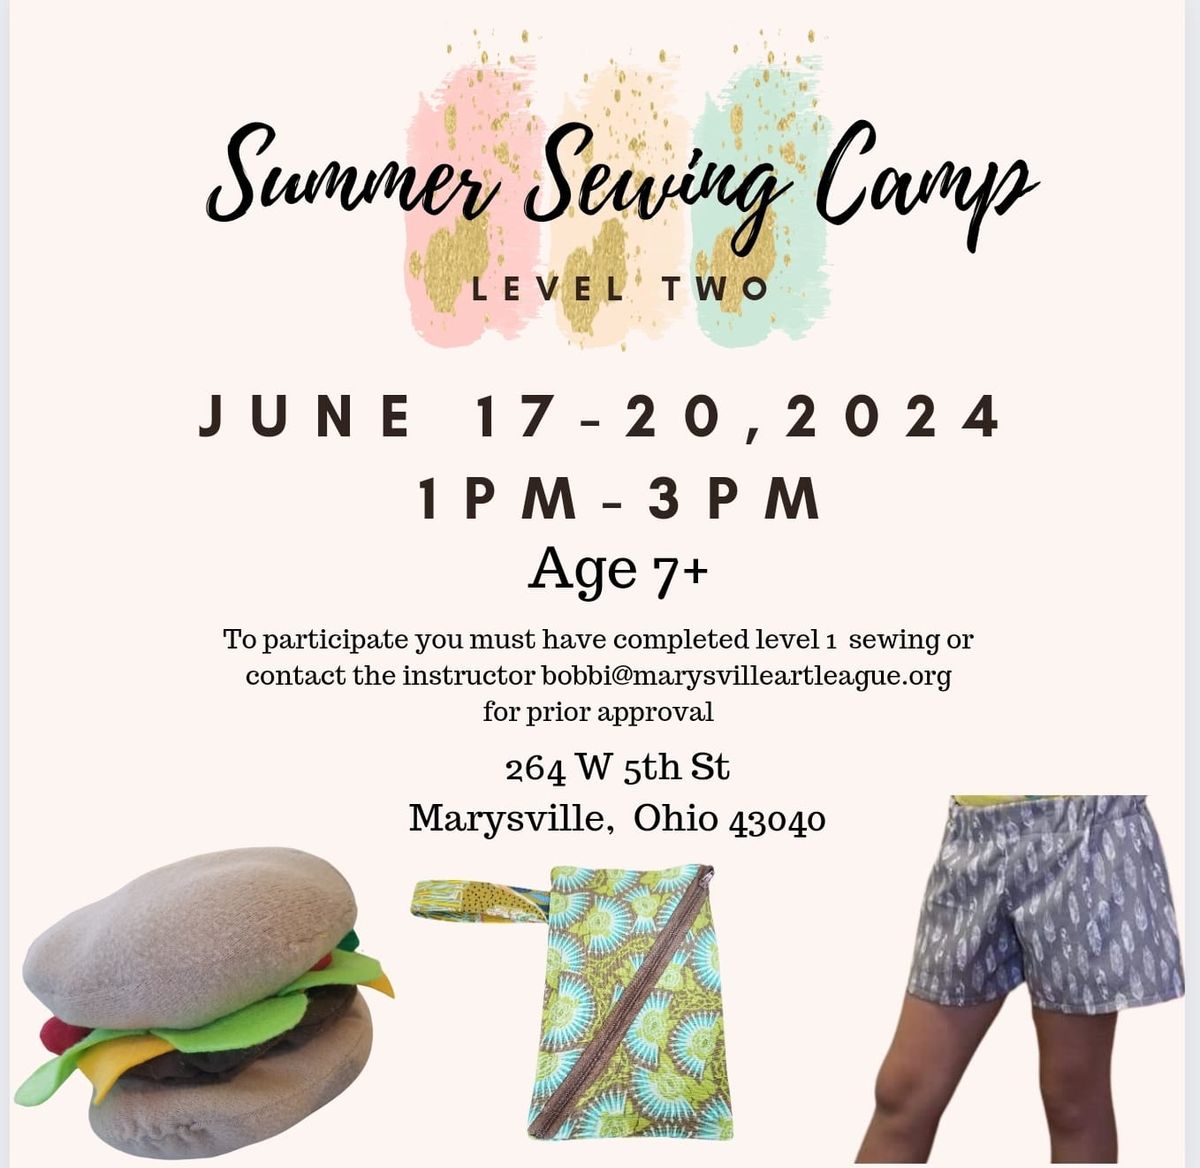 Summer Sewing Camp Level 2